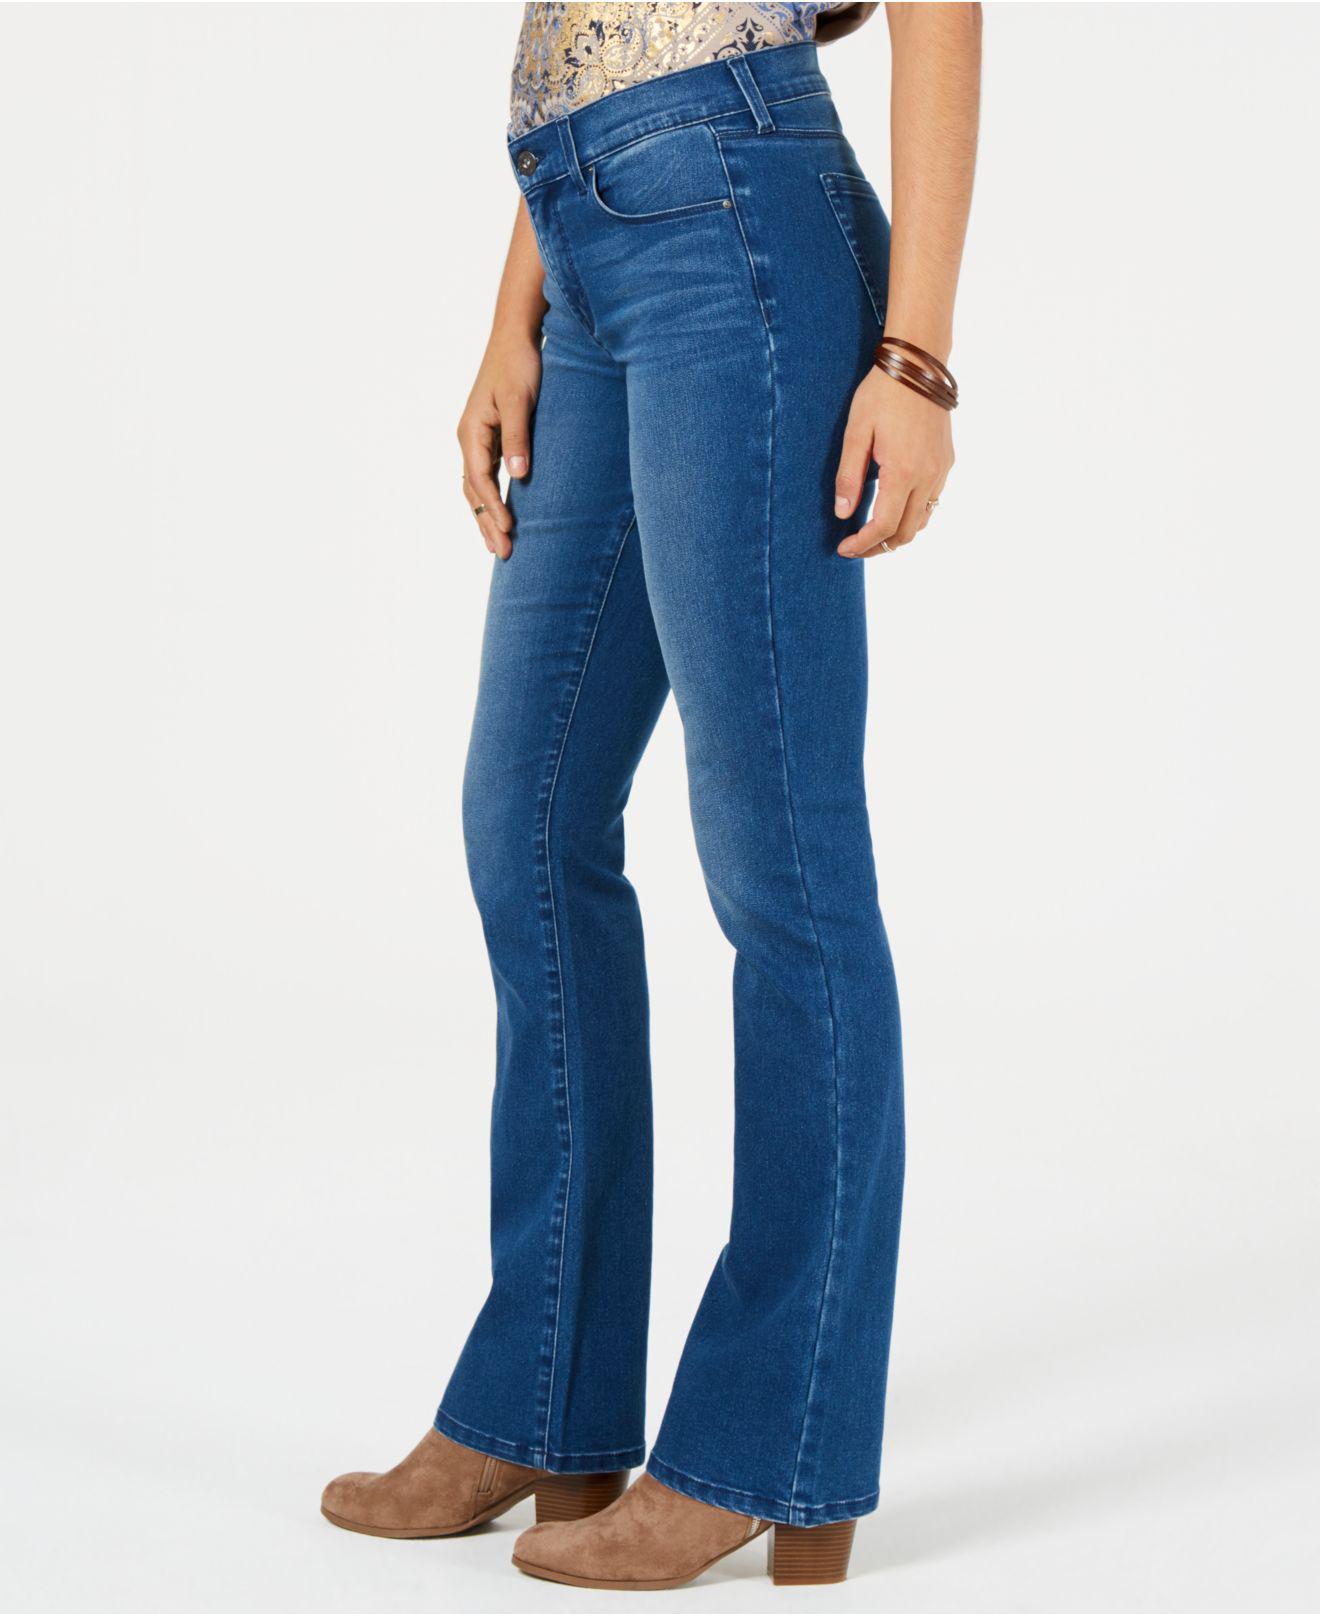 Style & Co Womens Bottoms Large / Blue Tummy-Control Bootcut Jeans